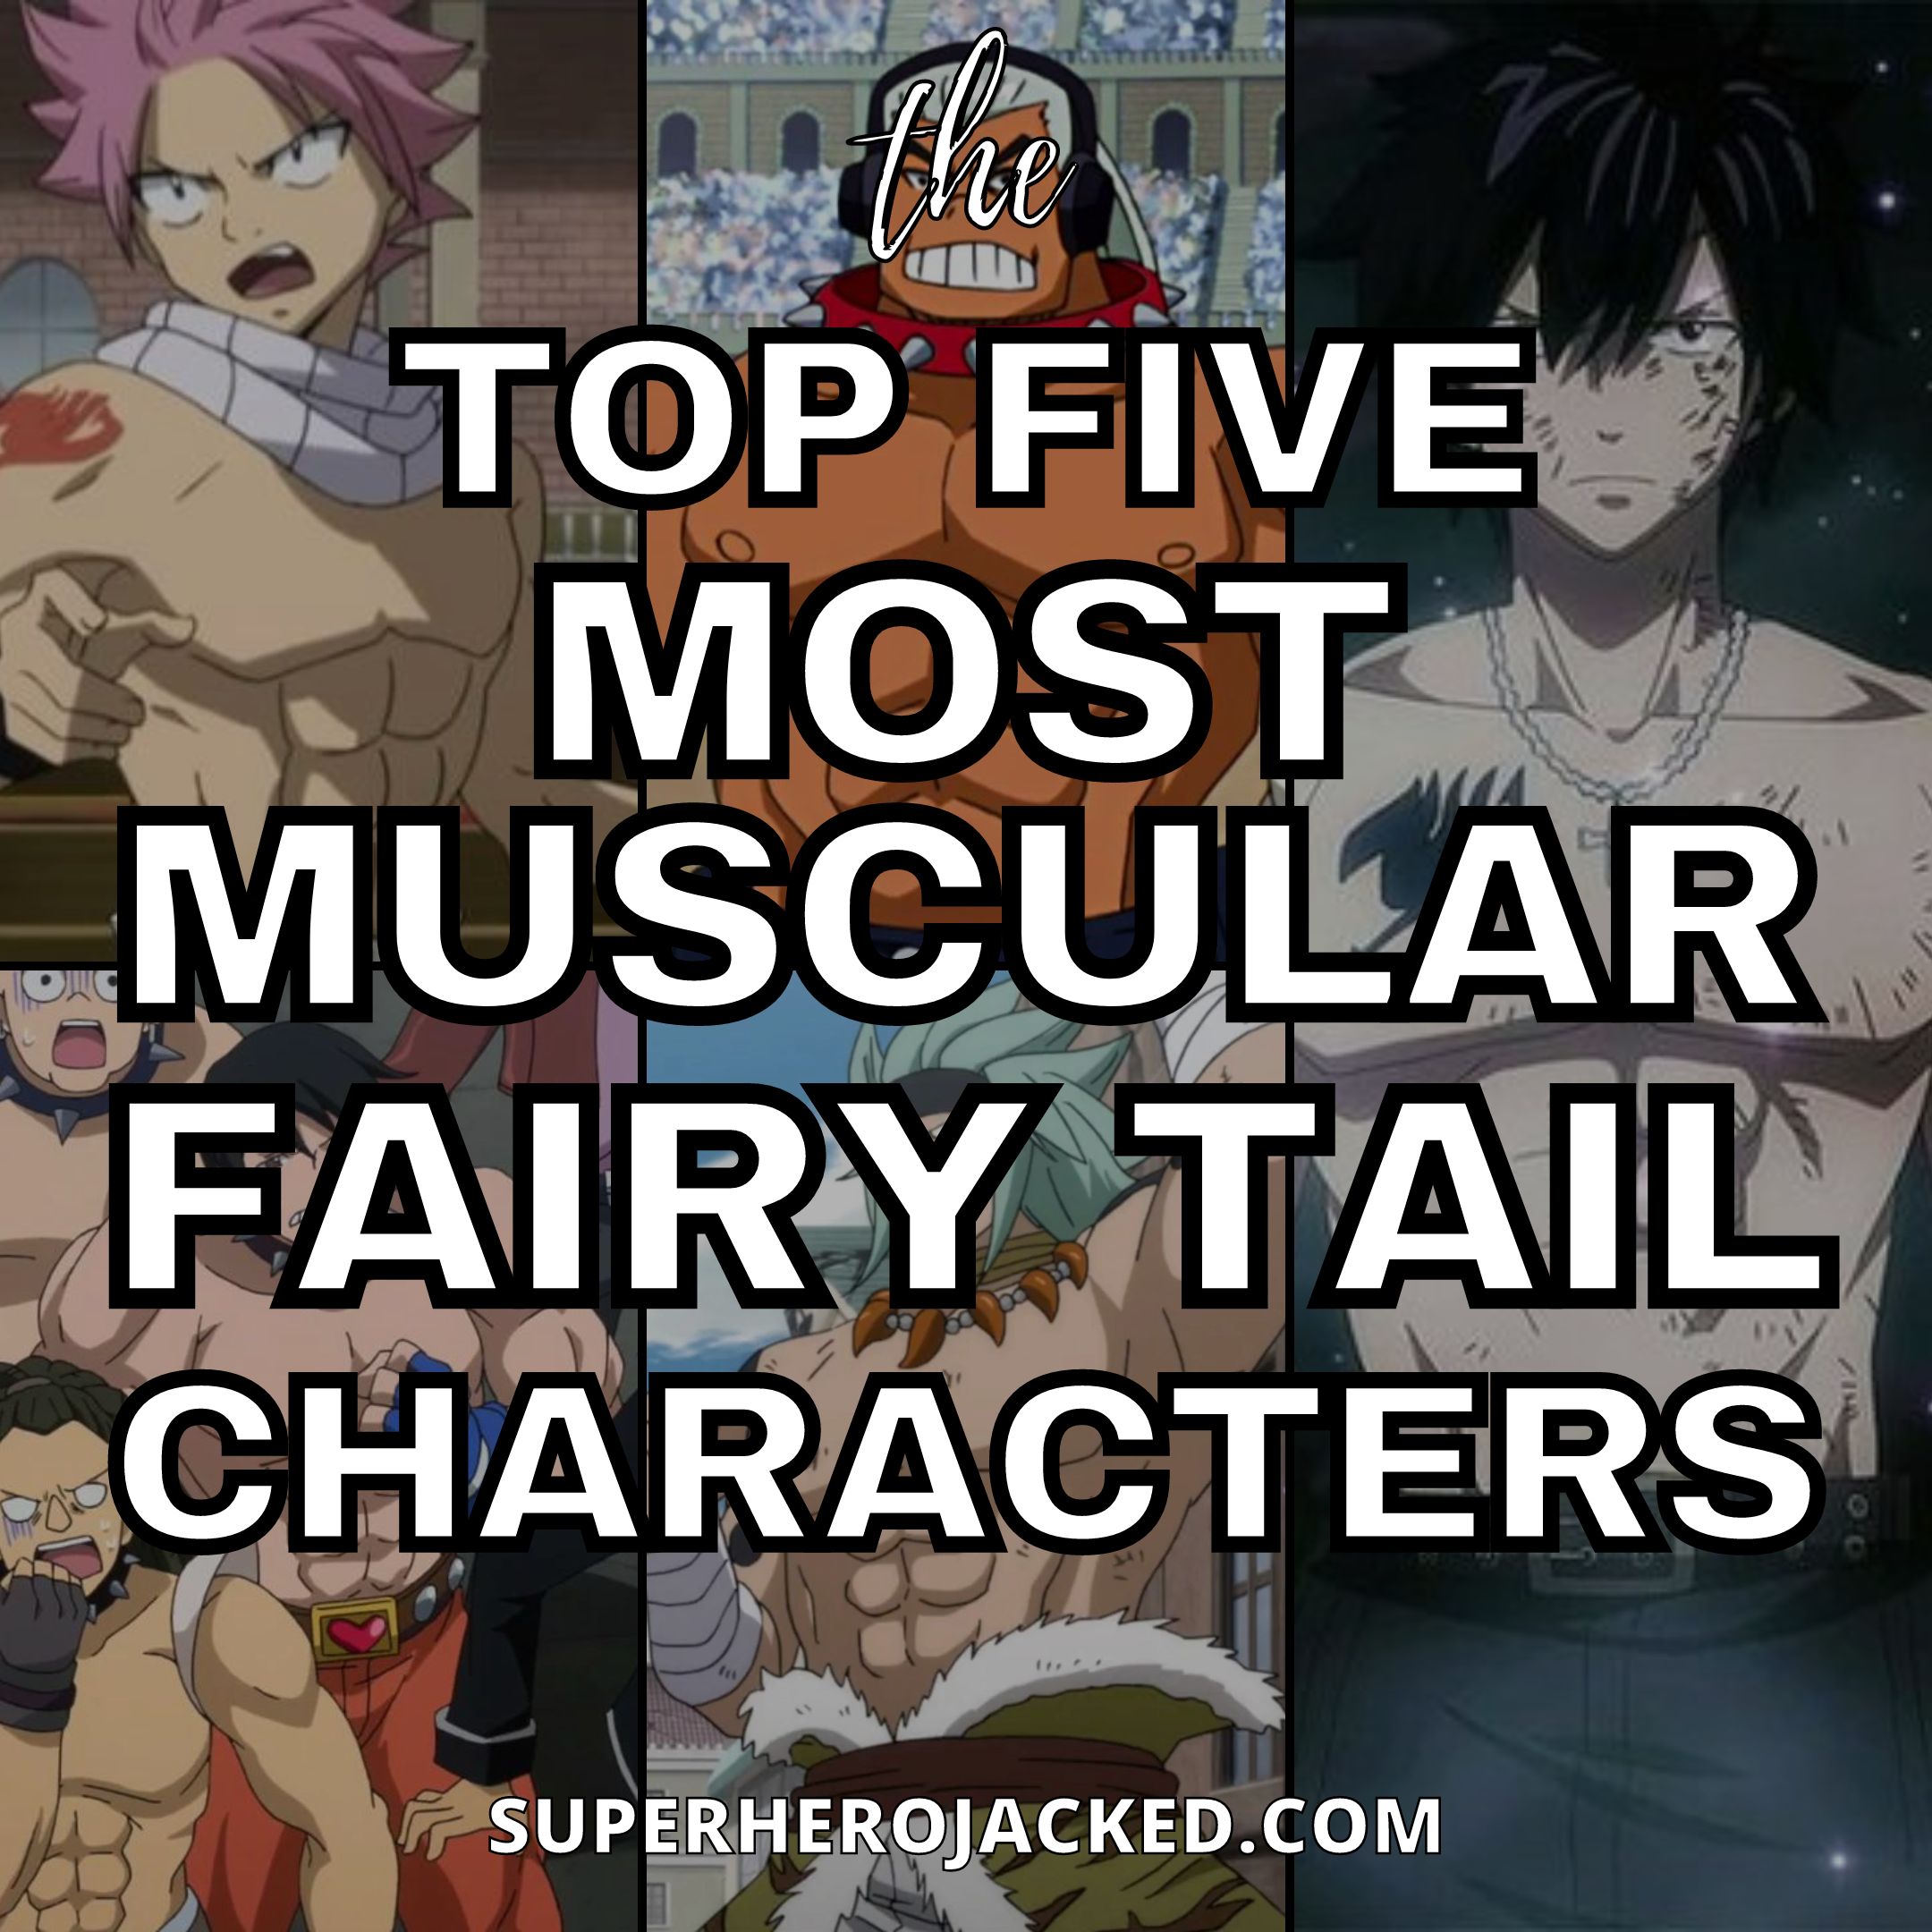 Lucy Heartfilia Natsu Dragneel Fairy Tail YouTube Wendy Marvell fairy tale  characters black Hair manga png  PNGEgg